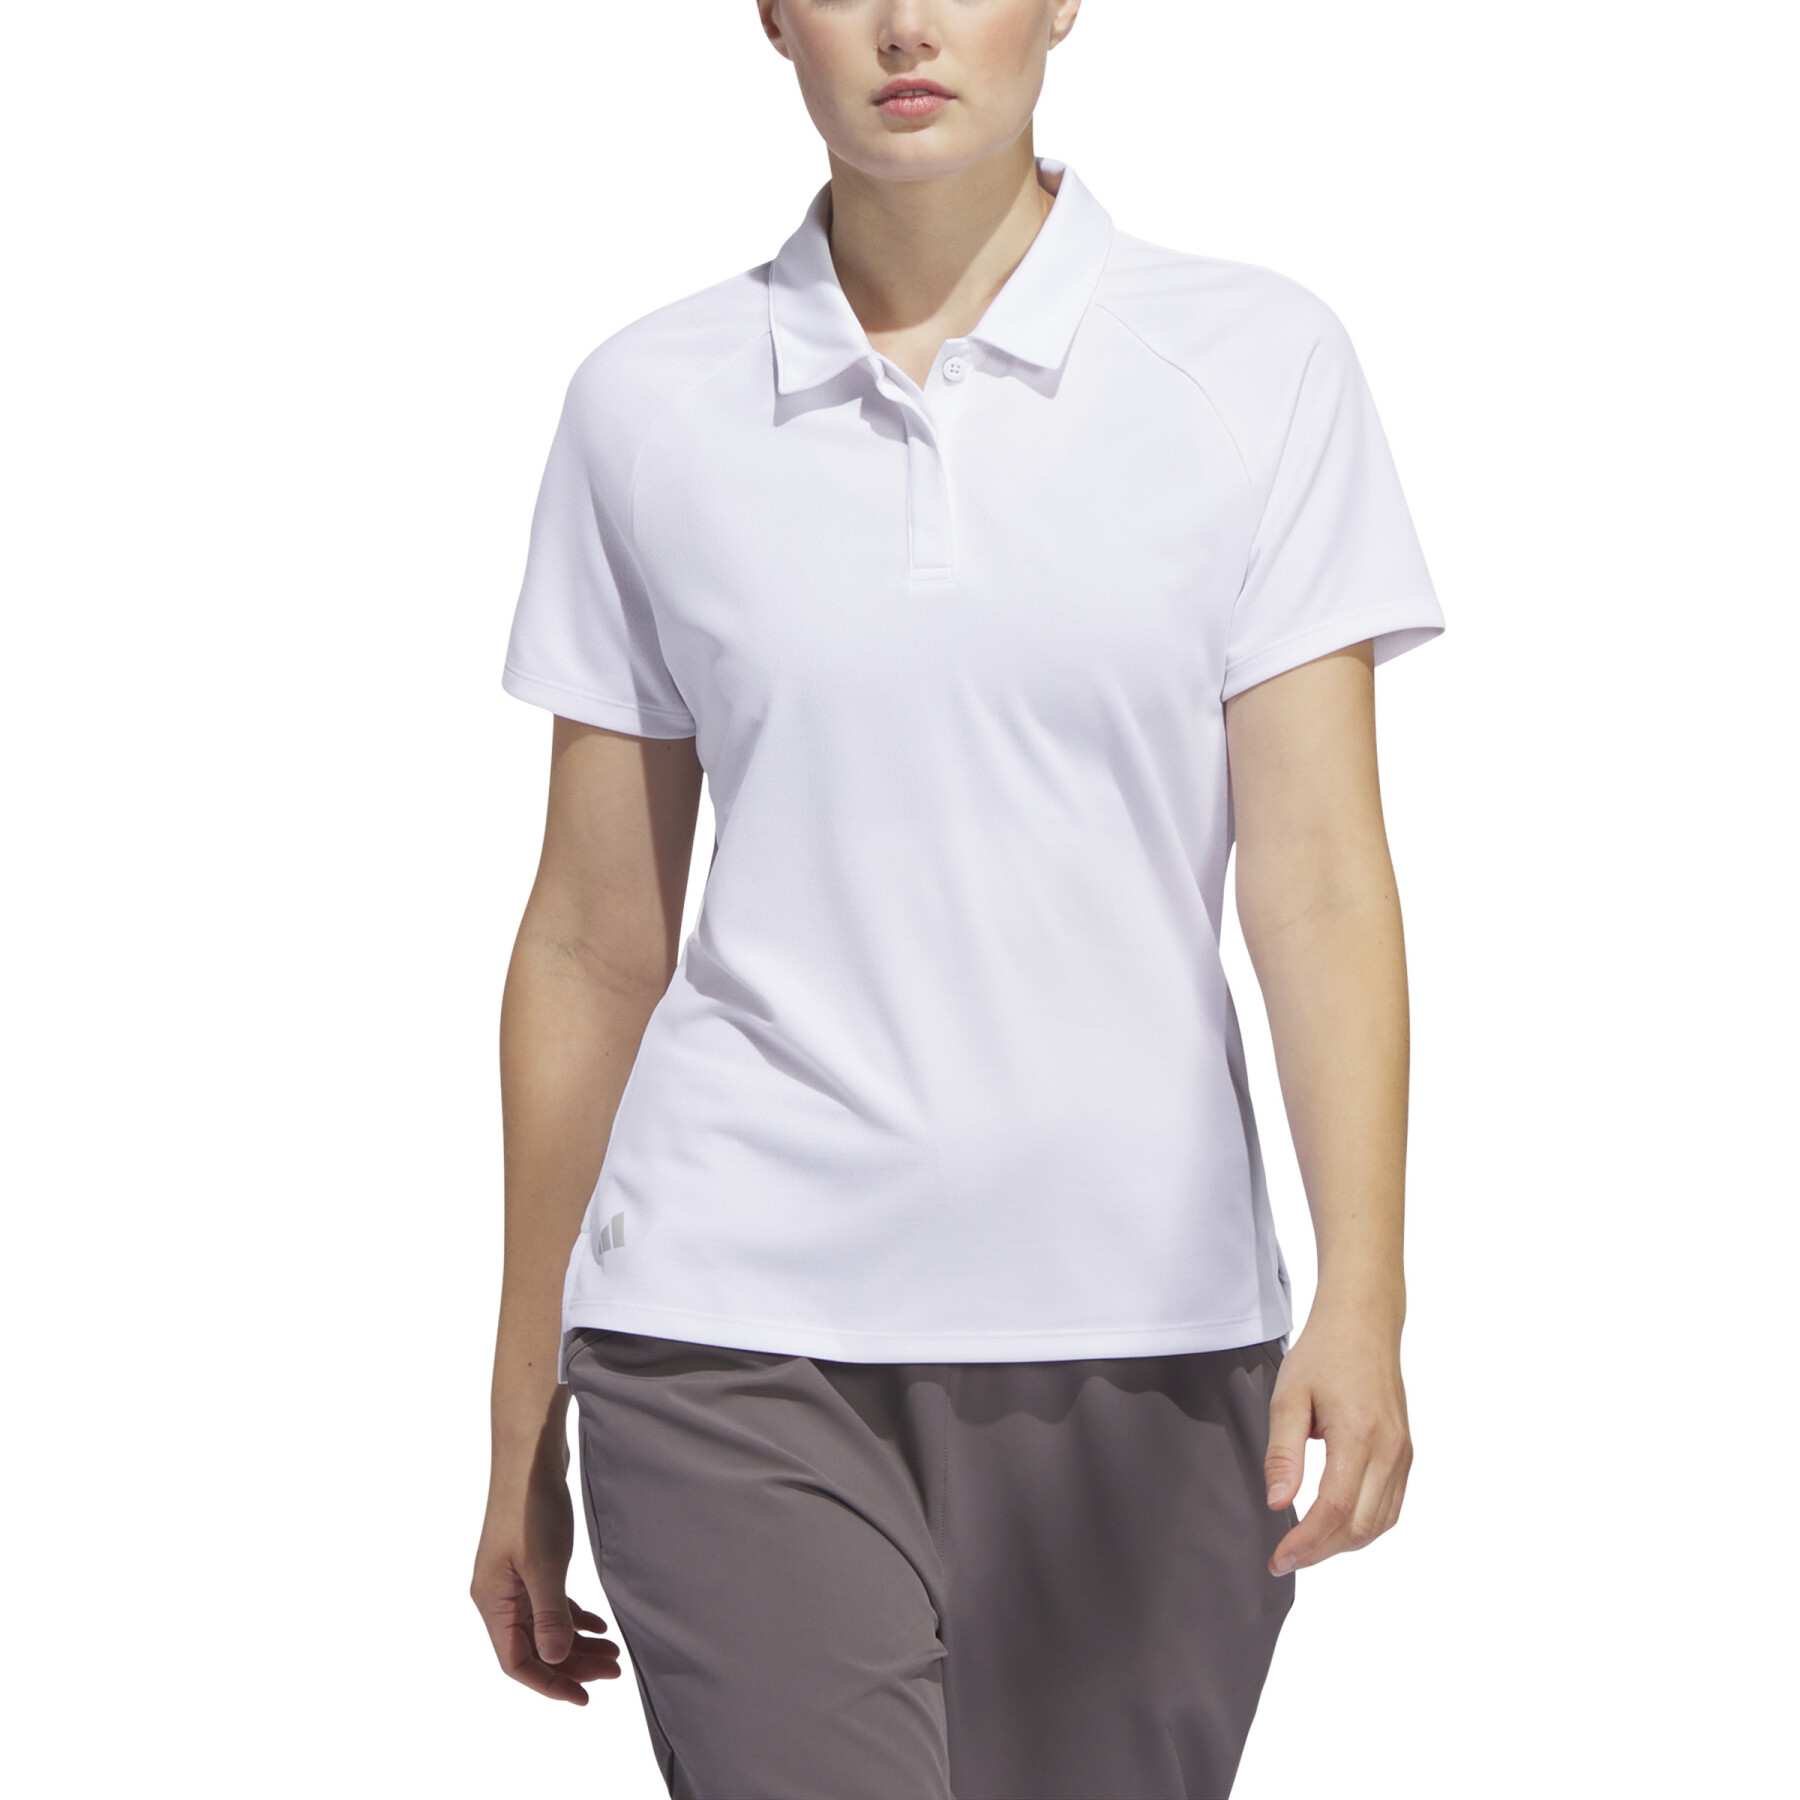 Women's textured polo shirt adidas Ultimate365 Heat.Rdy